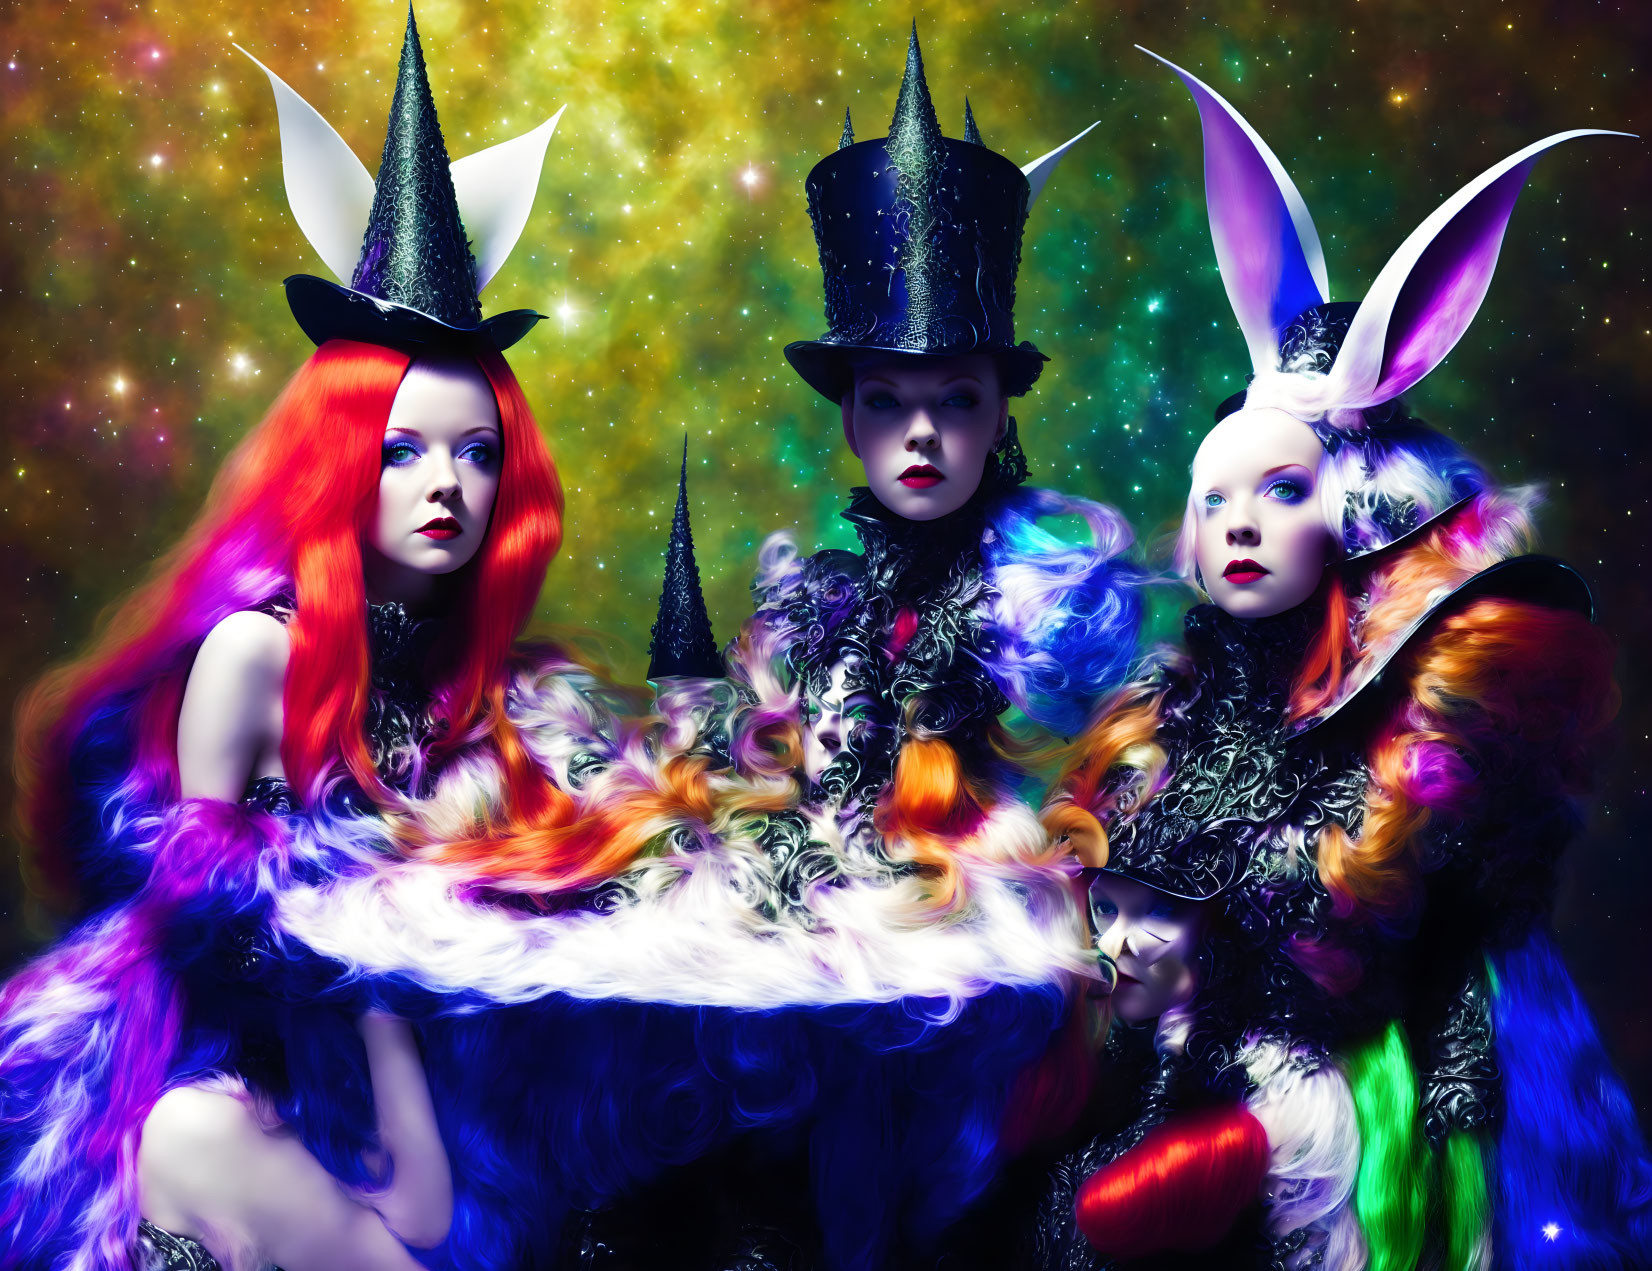 Three individuals in vibrant fantasy costumes with colorful hair and makeup against cosmic backdrop